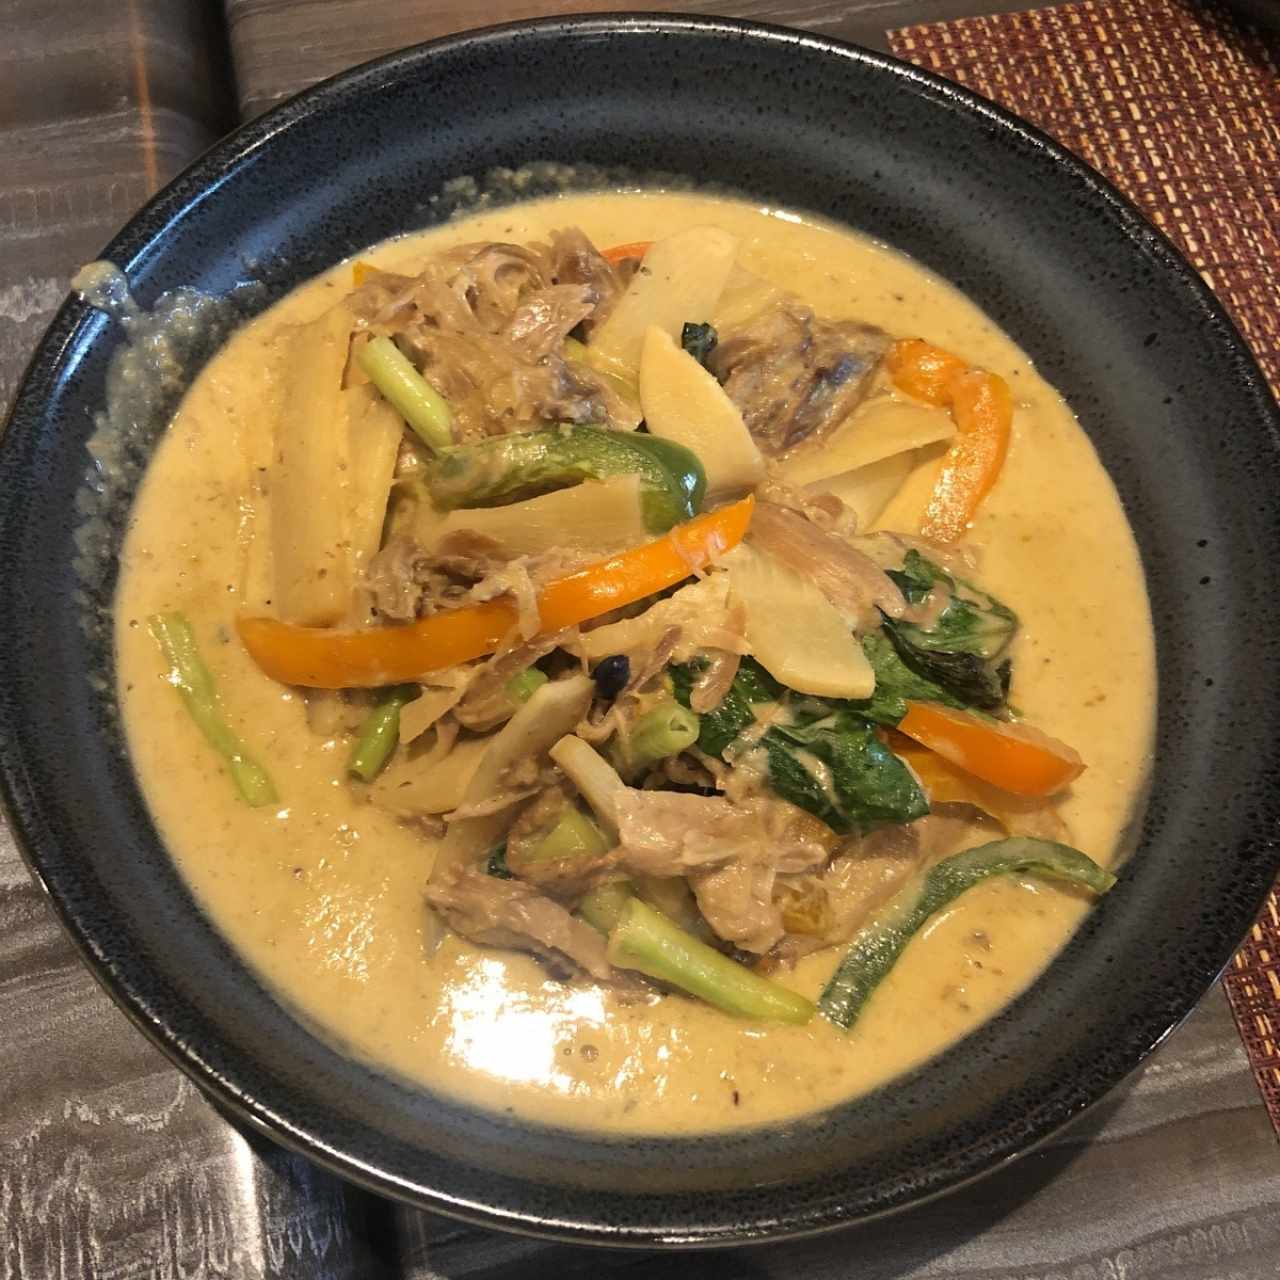 GREEN CURRY